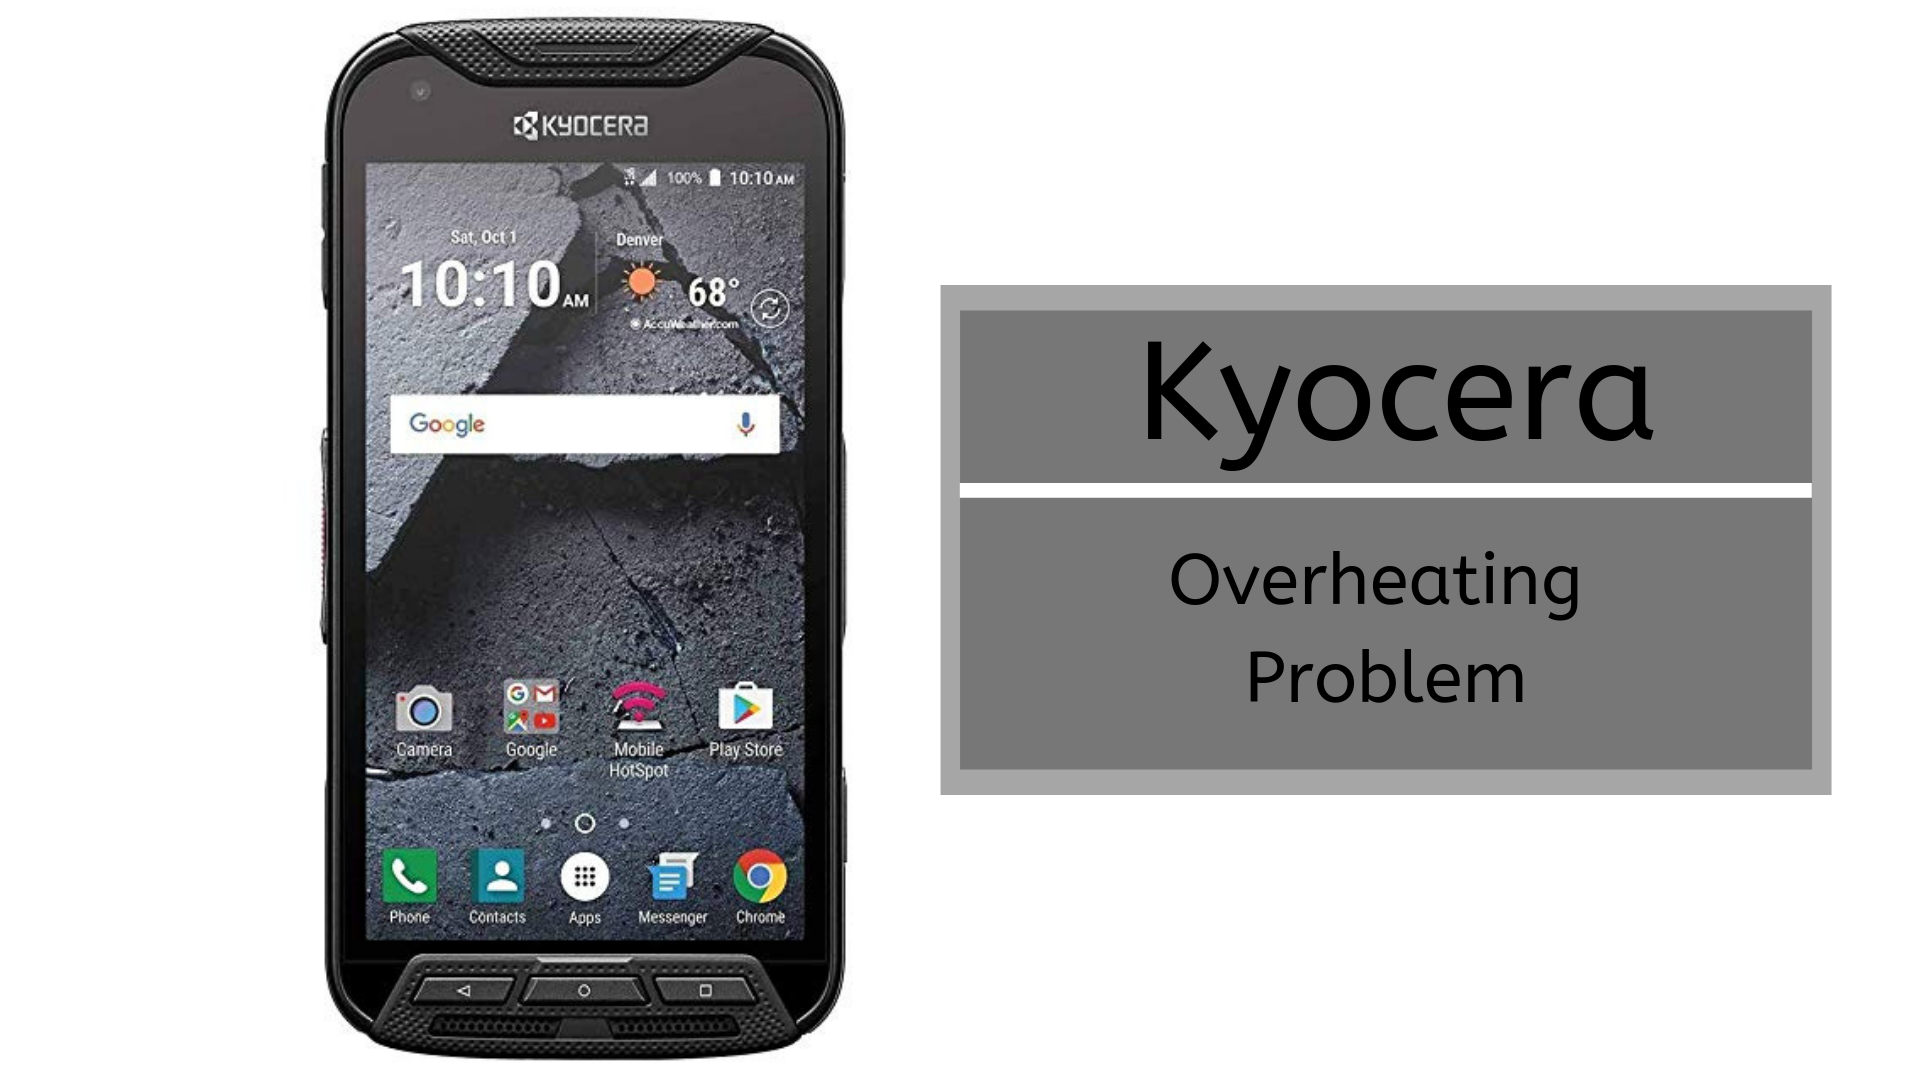 How To Fix Kyocera Overheating Problem - Troubleshooting Fix & Tips